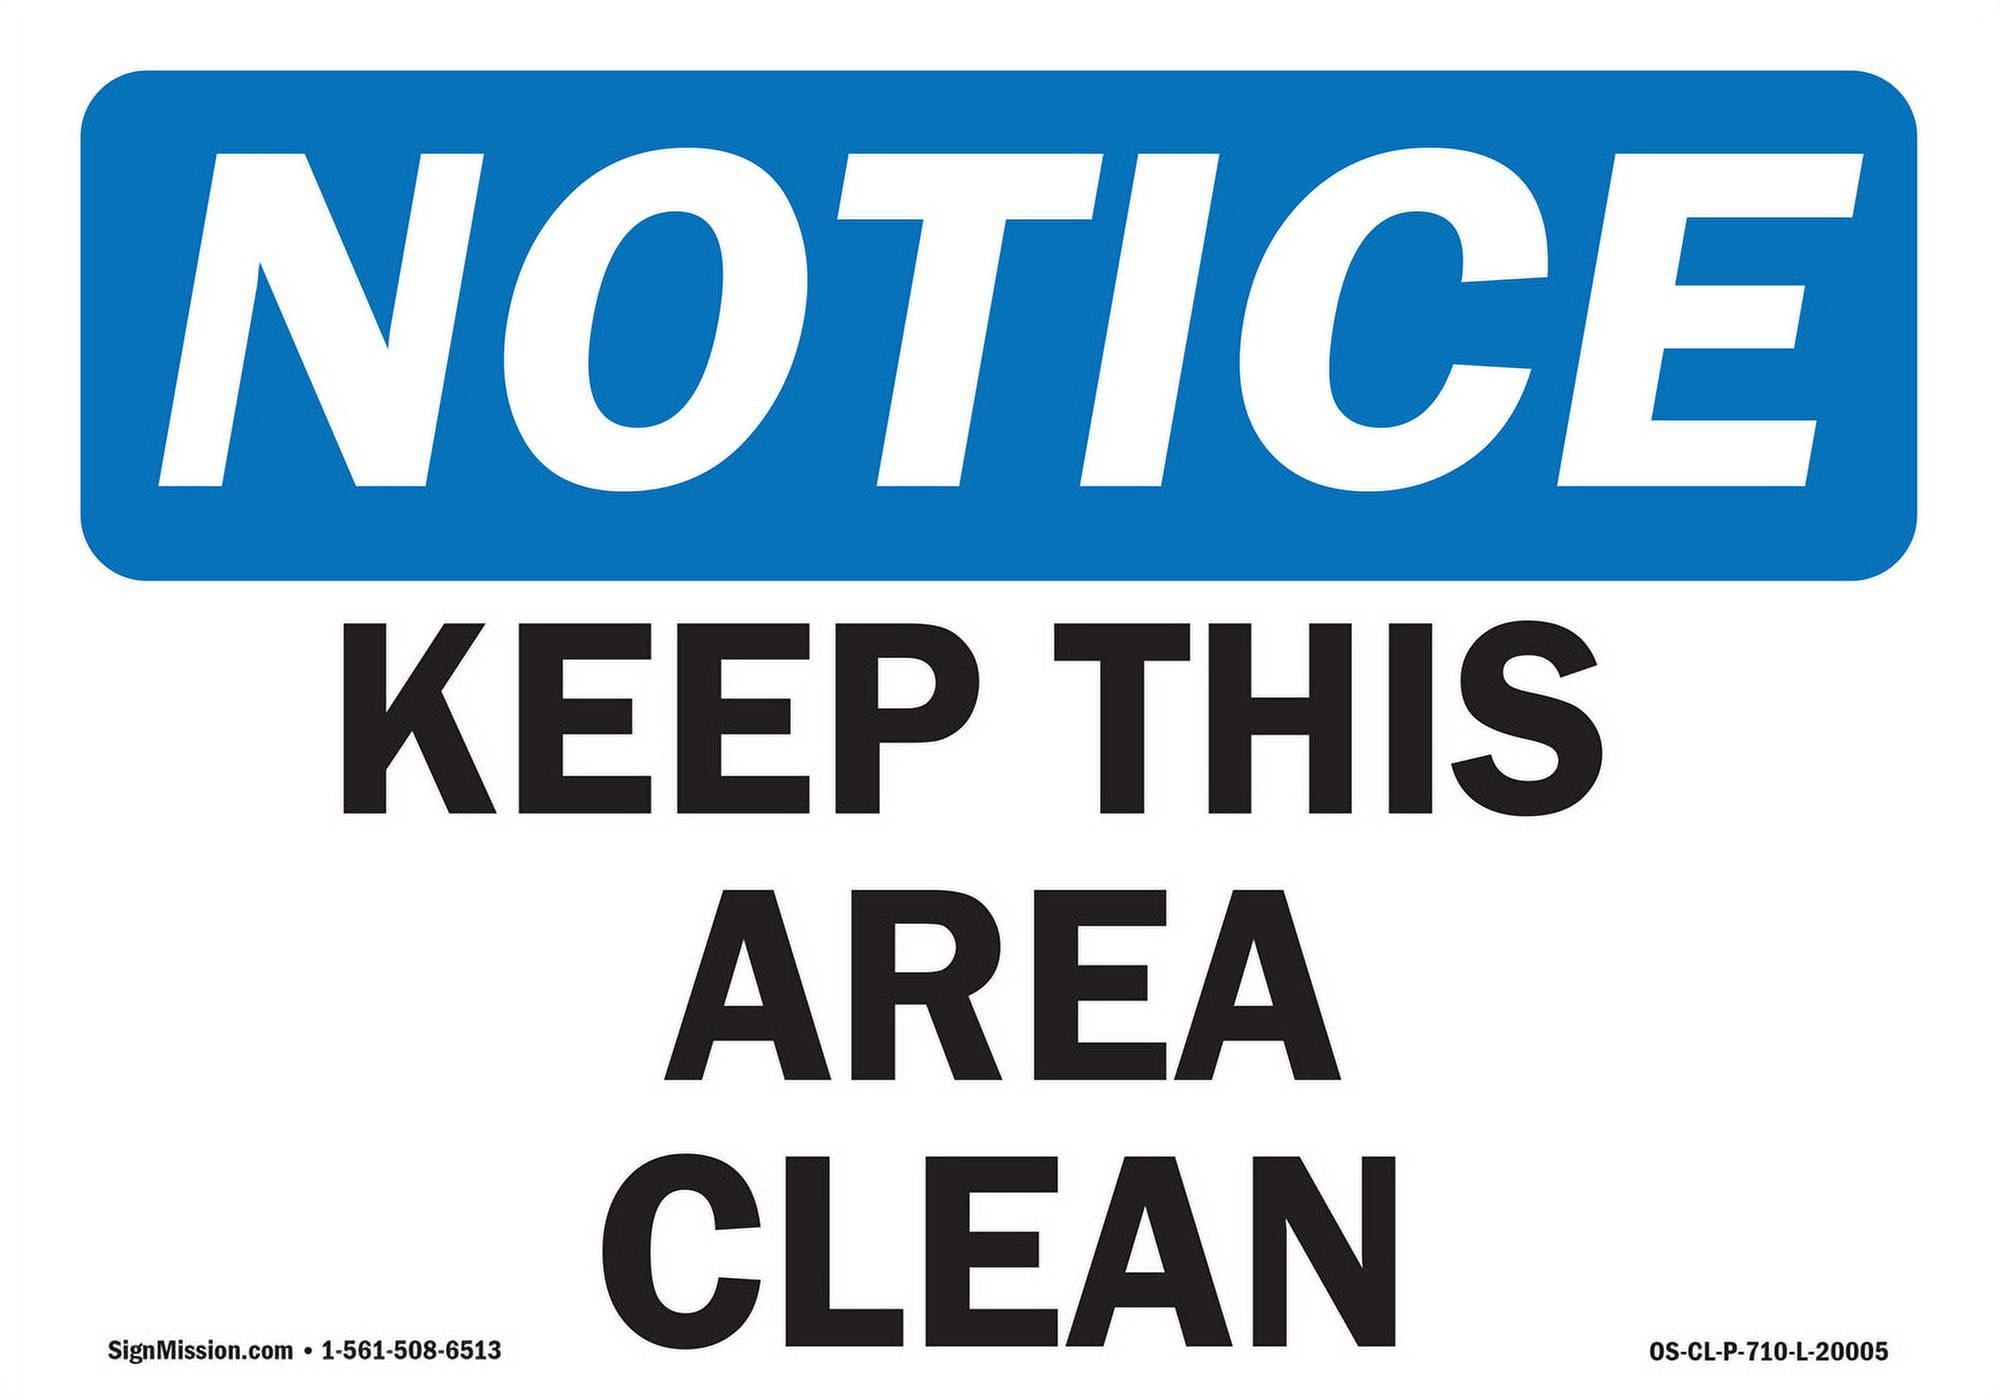 OSHA NOTICE HELP KEEP THIS PLACE CLEANAdhesive Vinyl Sign Decal 